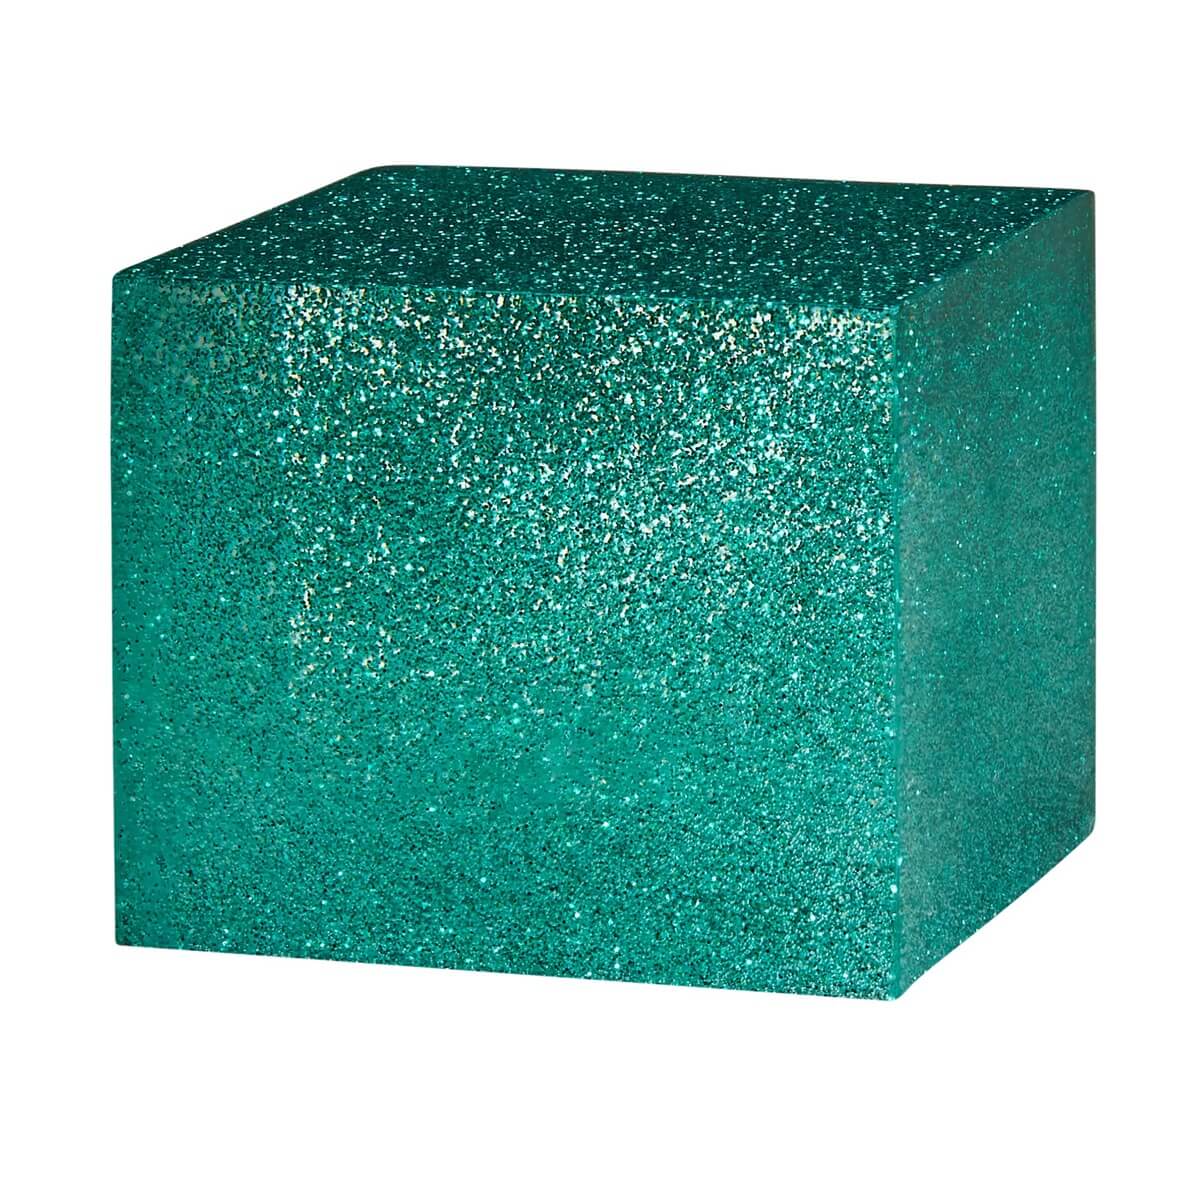 A resin cube made with the Turquoise Glitter Mica Powder Pigment by Pigmently.